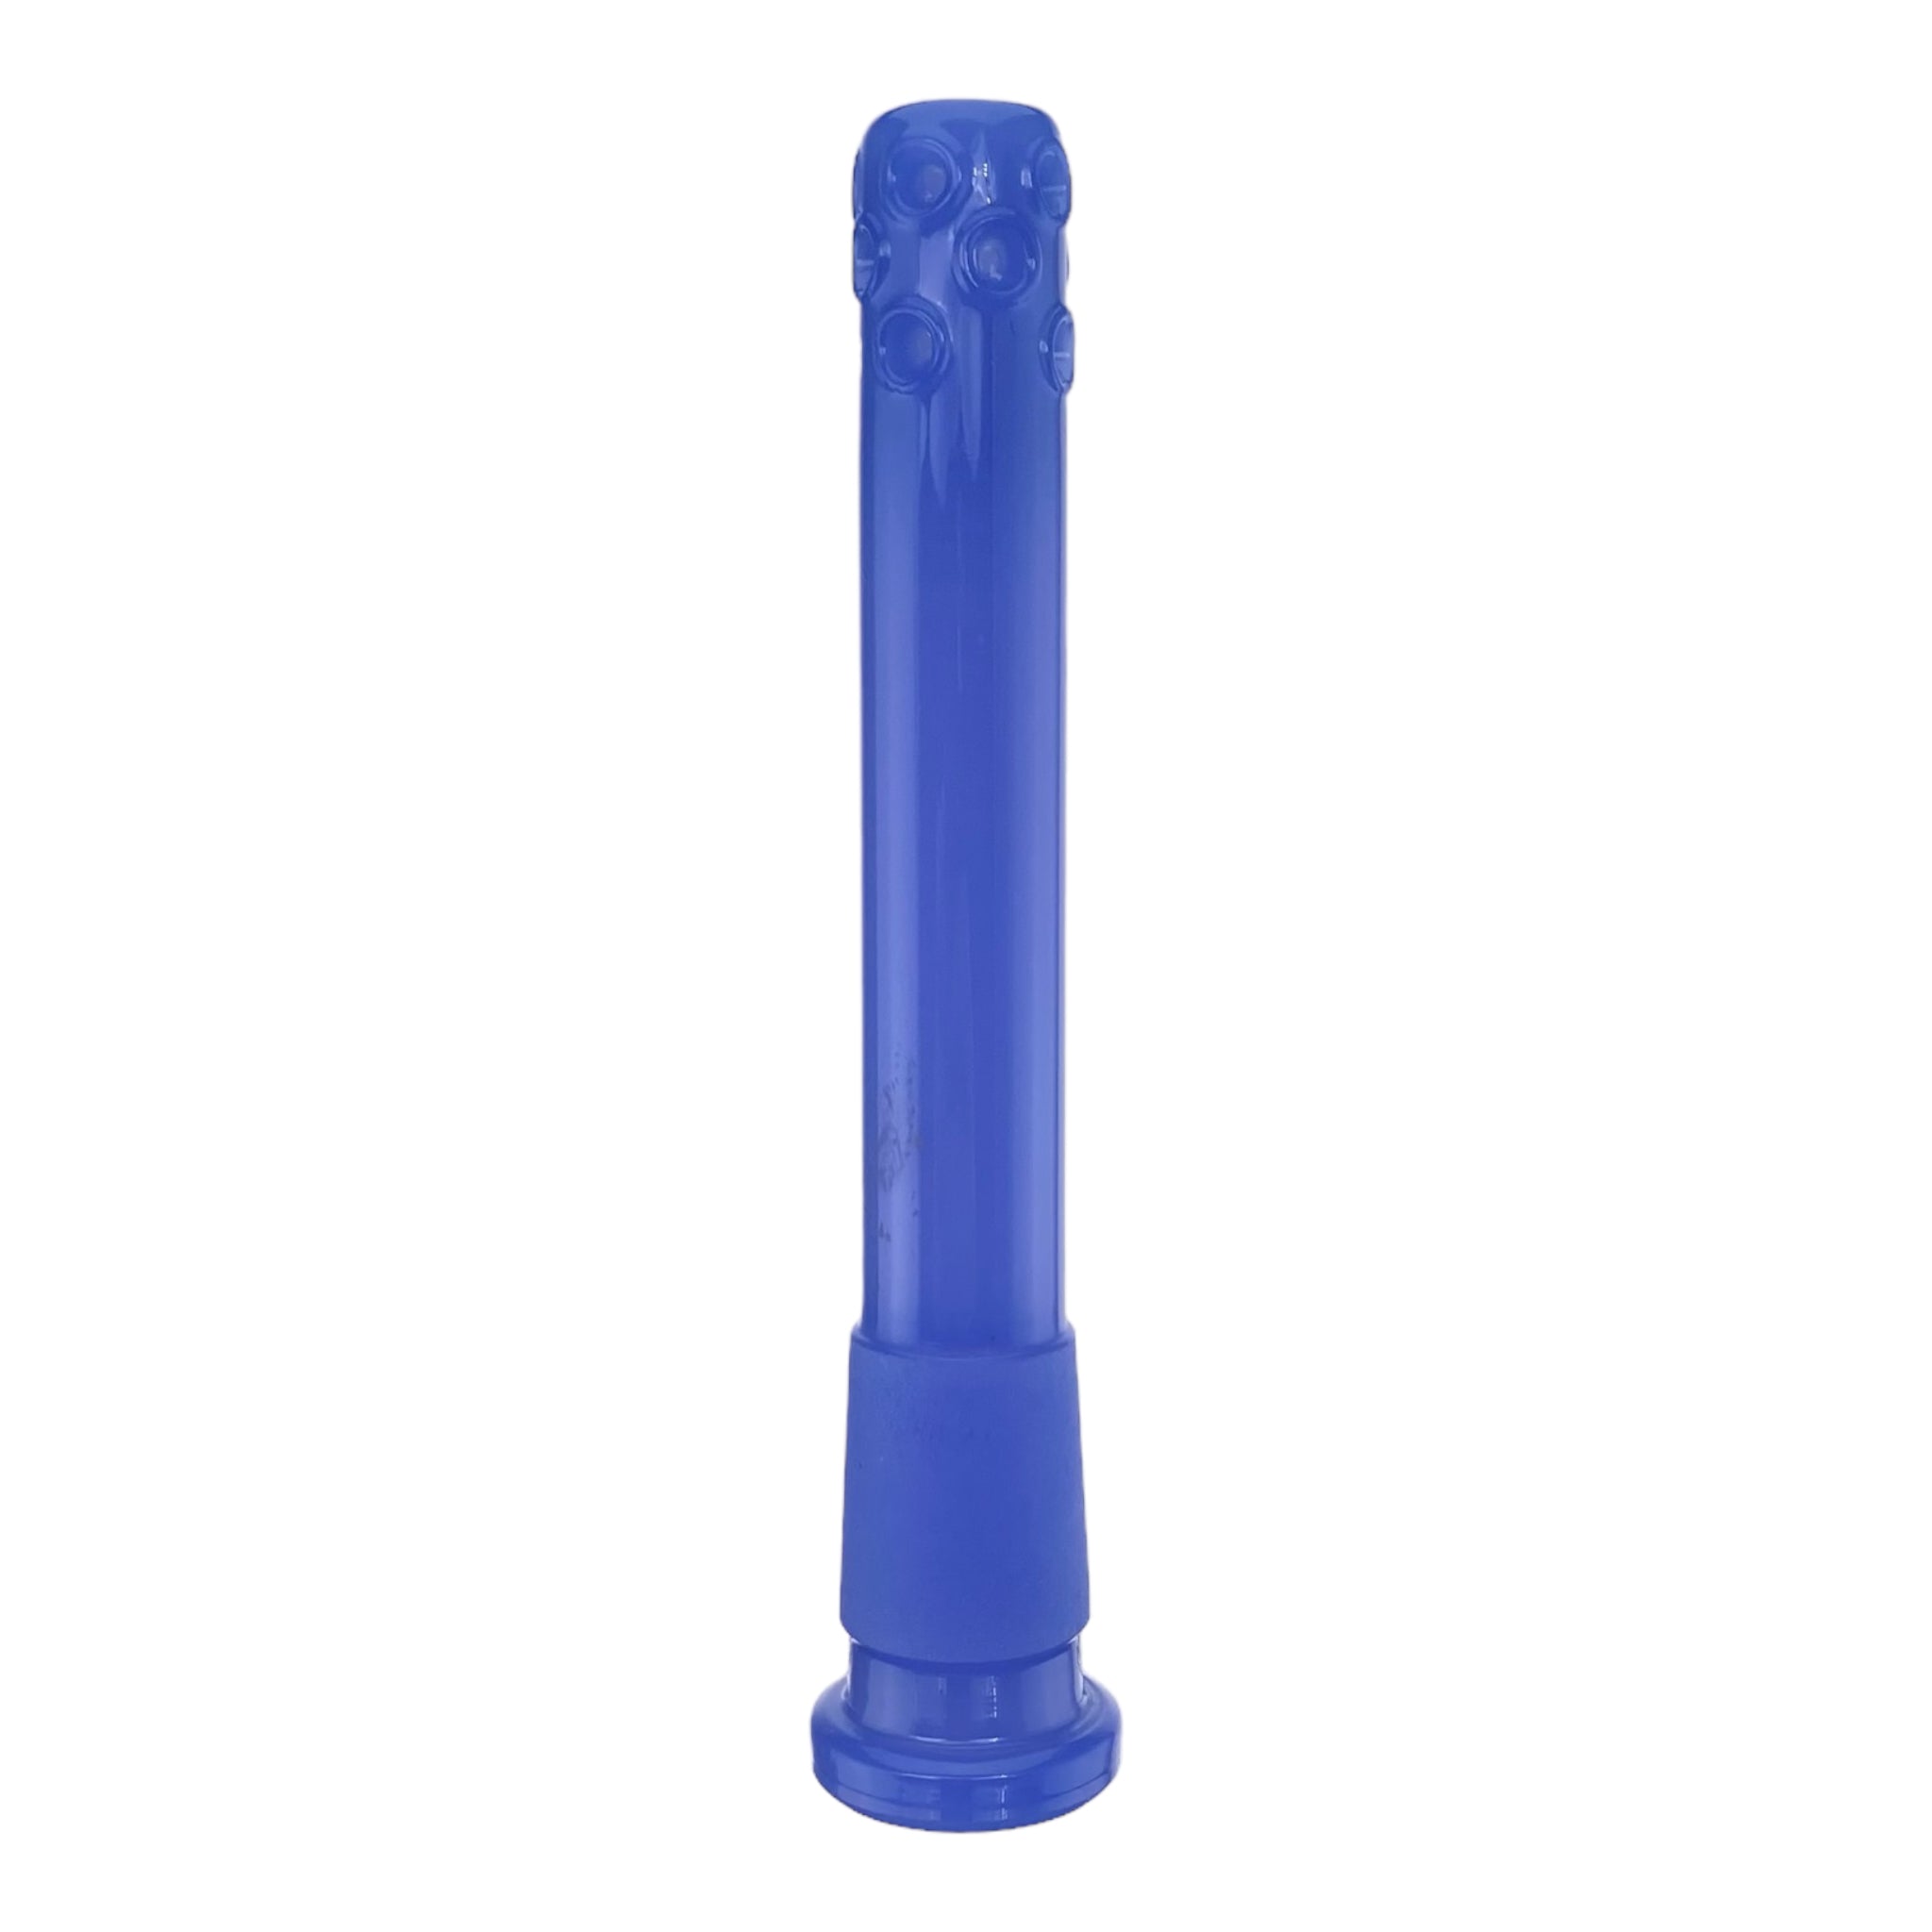 Periwinkle 4.5 Inch 18mm - 14mm Downstem For Glass Bong